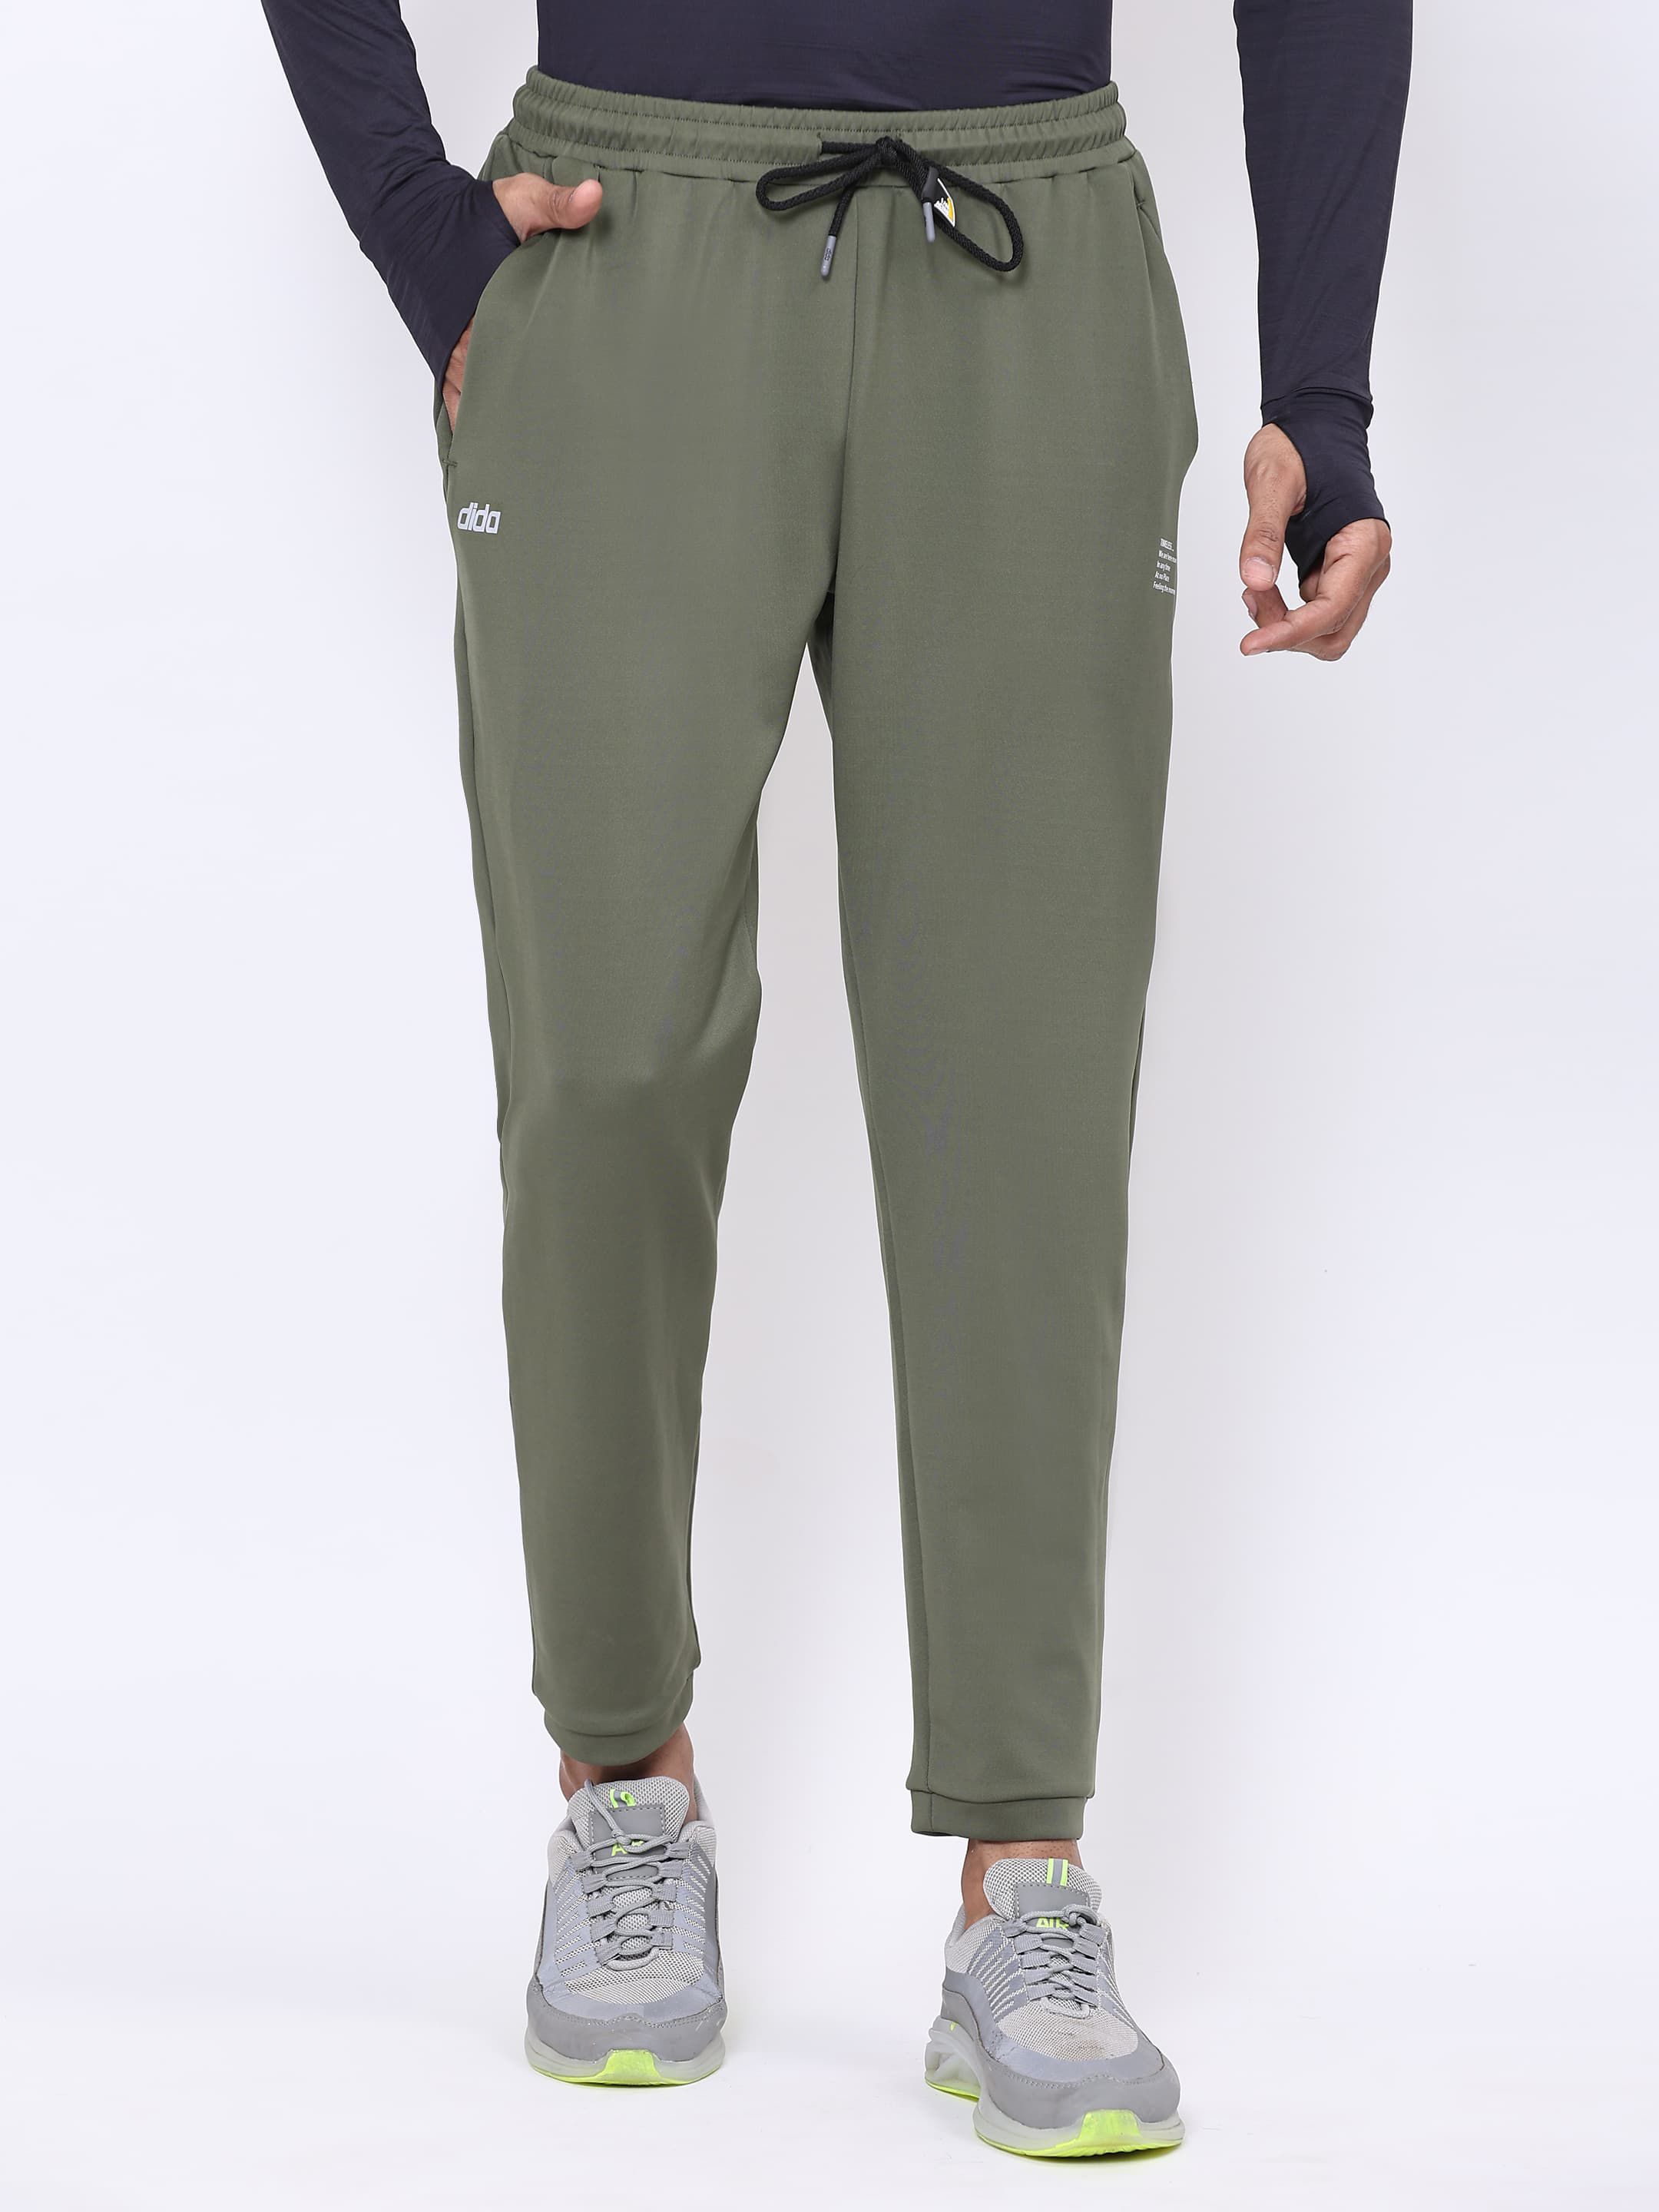     			Dida Sportswear Dark Green Polyester Men's Sports Trackpants ( Pack of 1 )